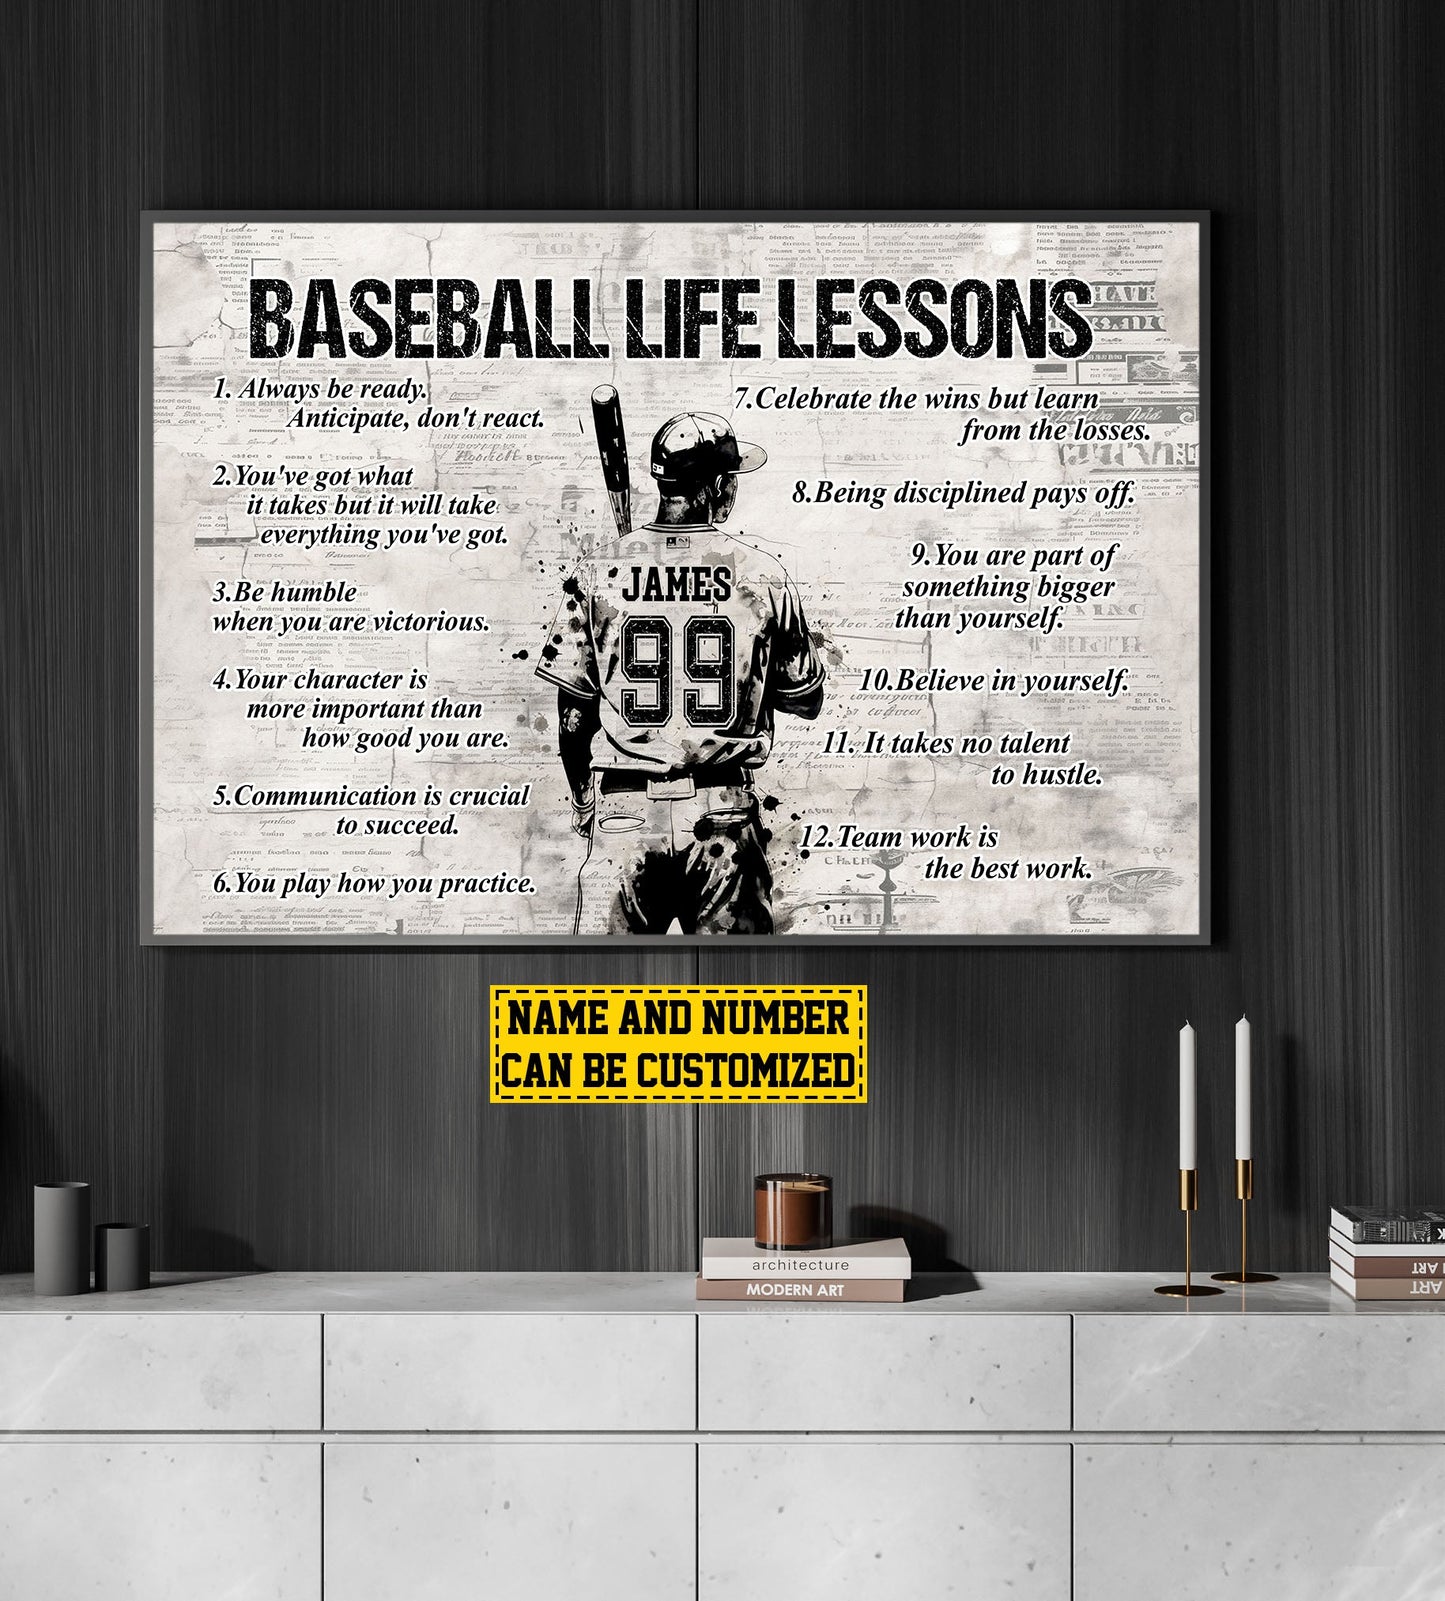 Baseball Life Lessons, Personalized Motivational Baseball Canvas Painting, Inspirational Quotes Wall Art Decor, Poster Gift For Baseball Lovers